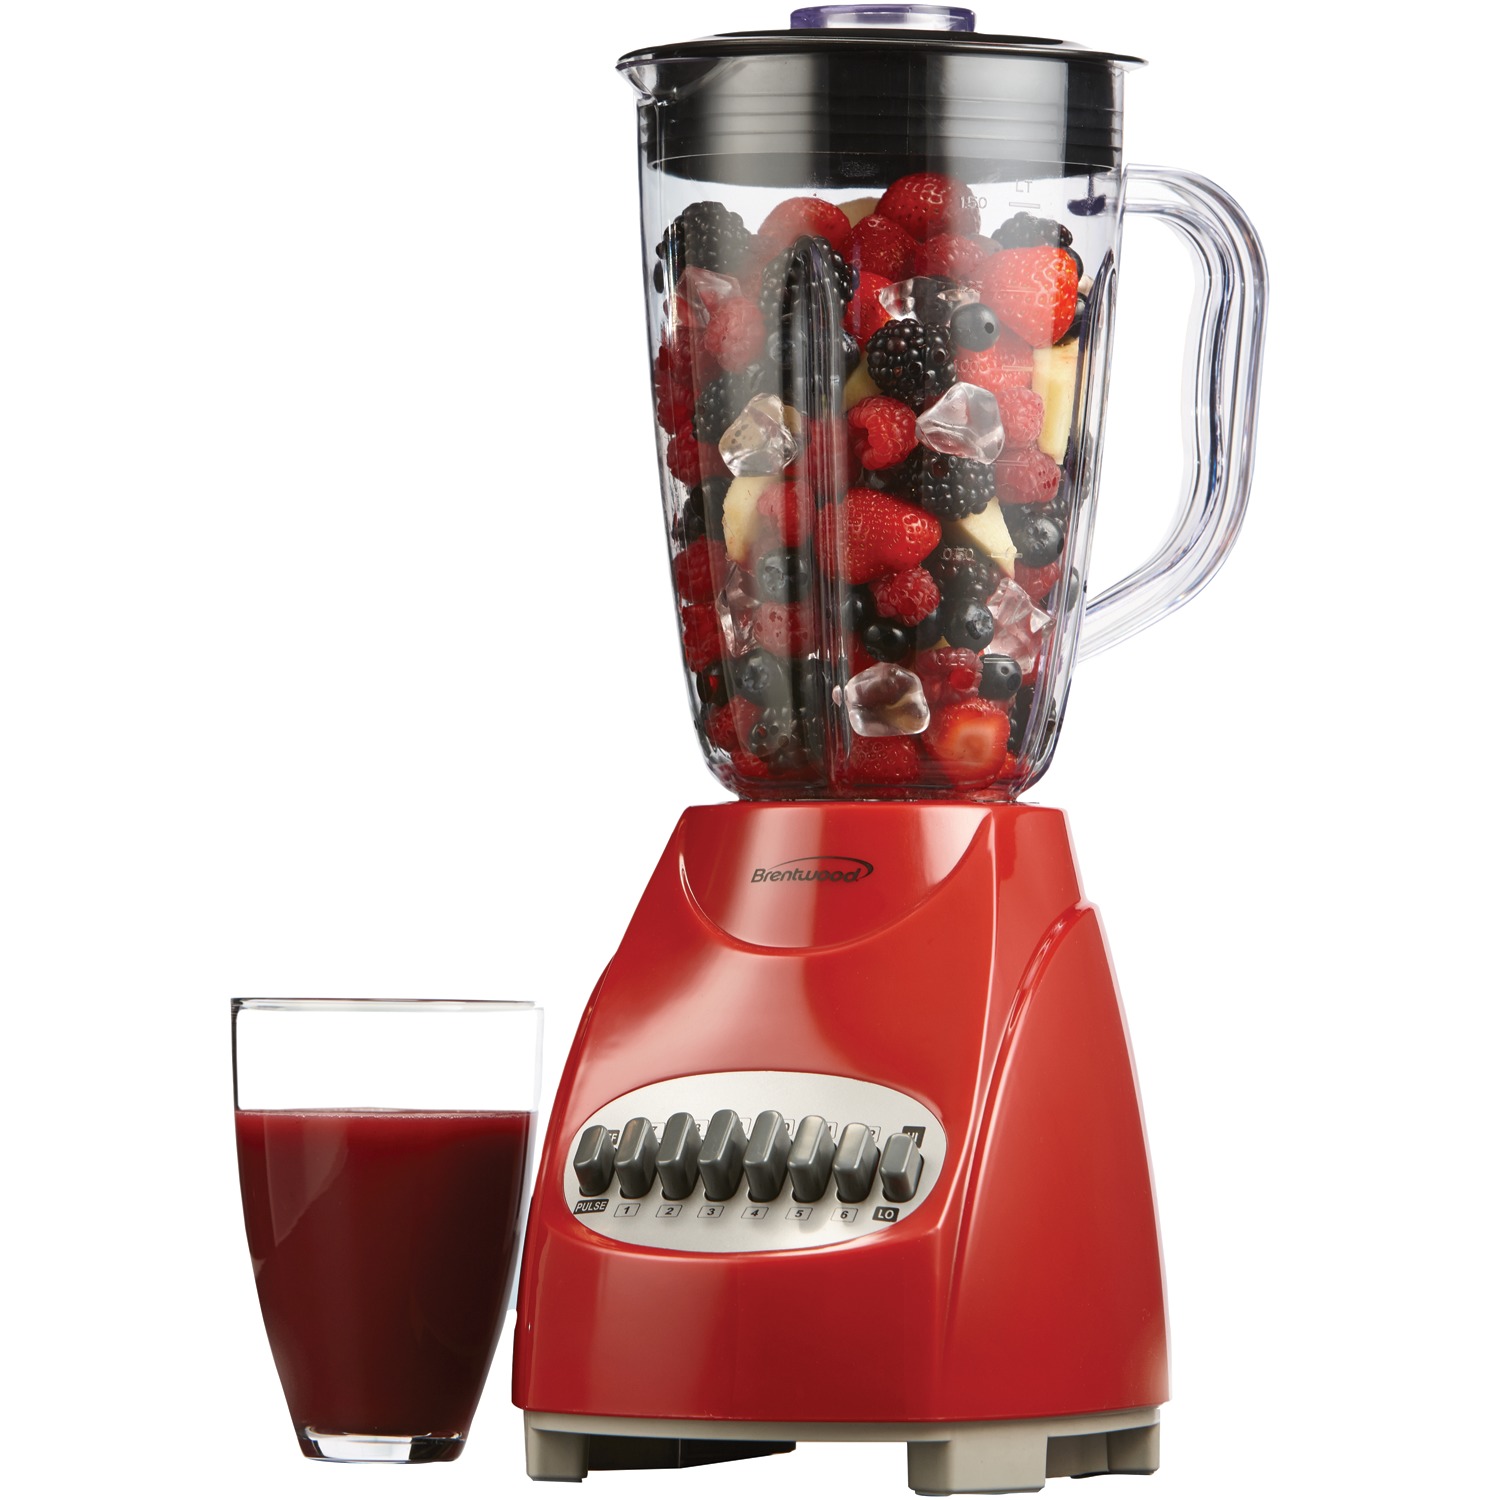 Brentwood Appliances Jb-220r 50-ounce 12-speed + Pulse Electric Blender with Plastic Jar (red) - image 2 of 12